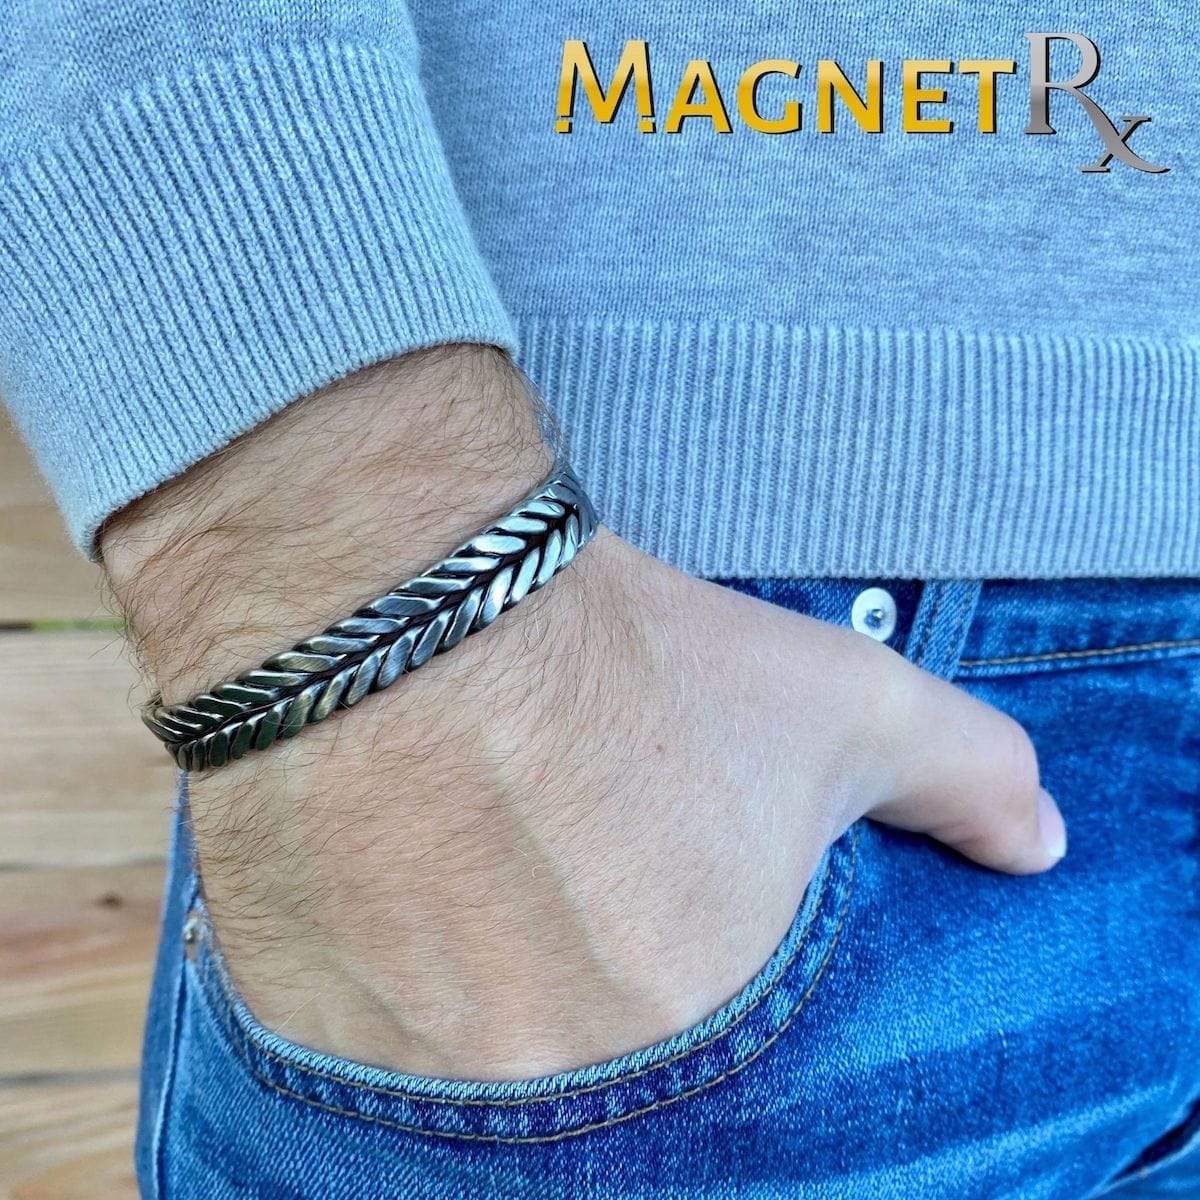 Woven Magnetic Therapy Bracelet Cuff (Brushed Silver)